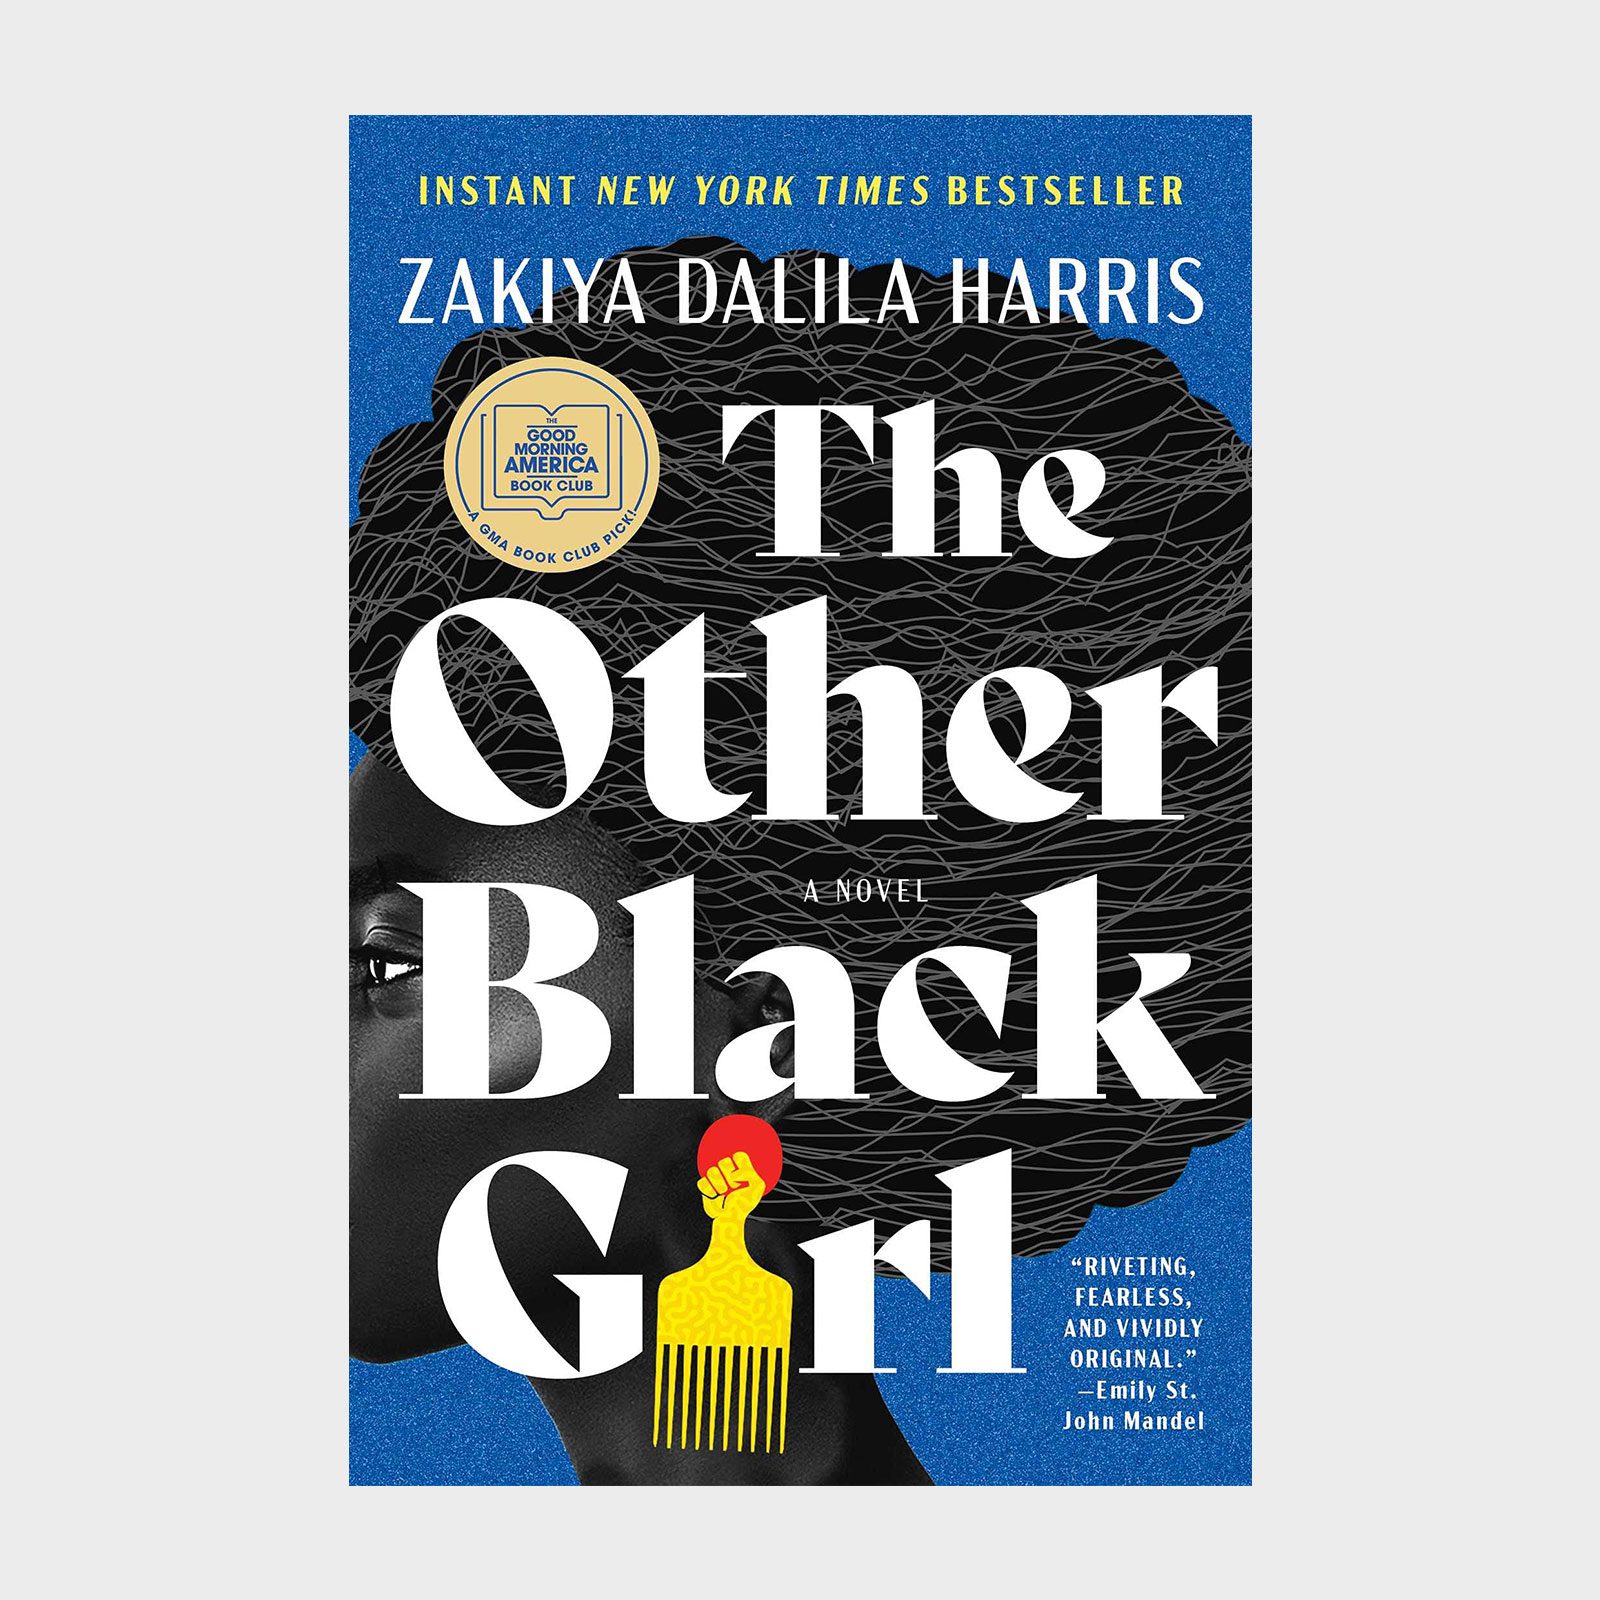 62 great books by Black authors, recommended by TED speakers